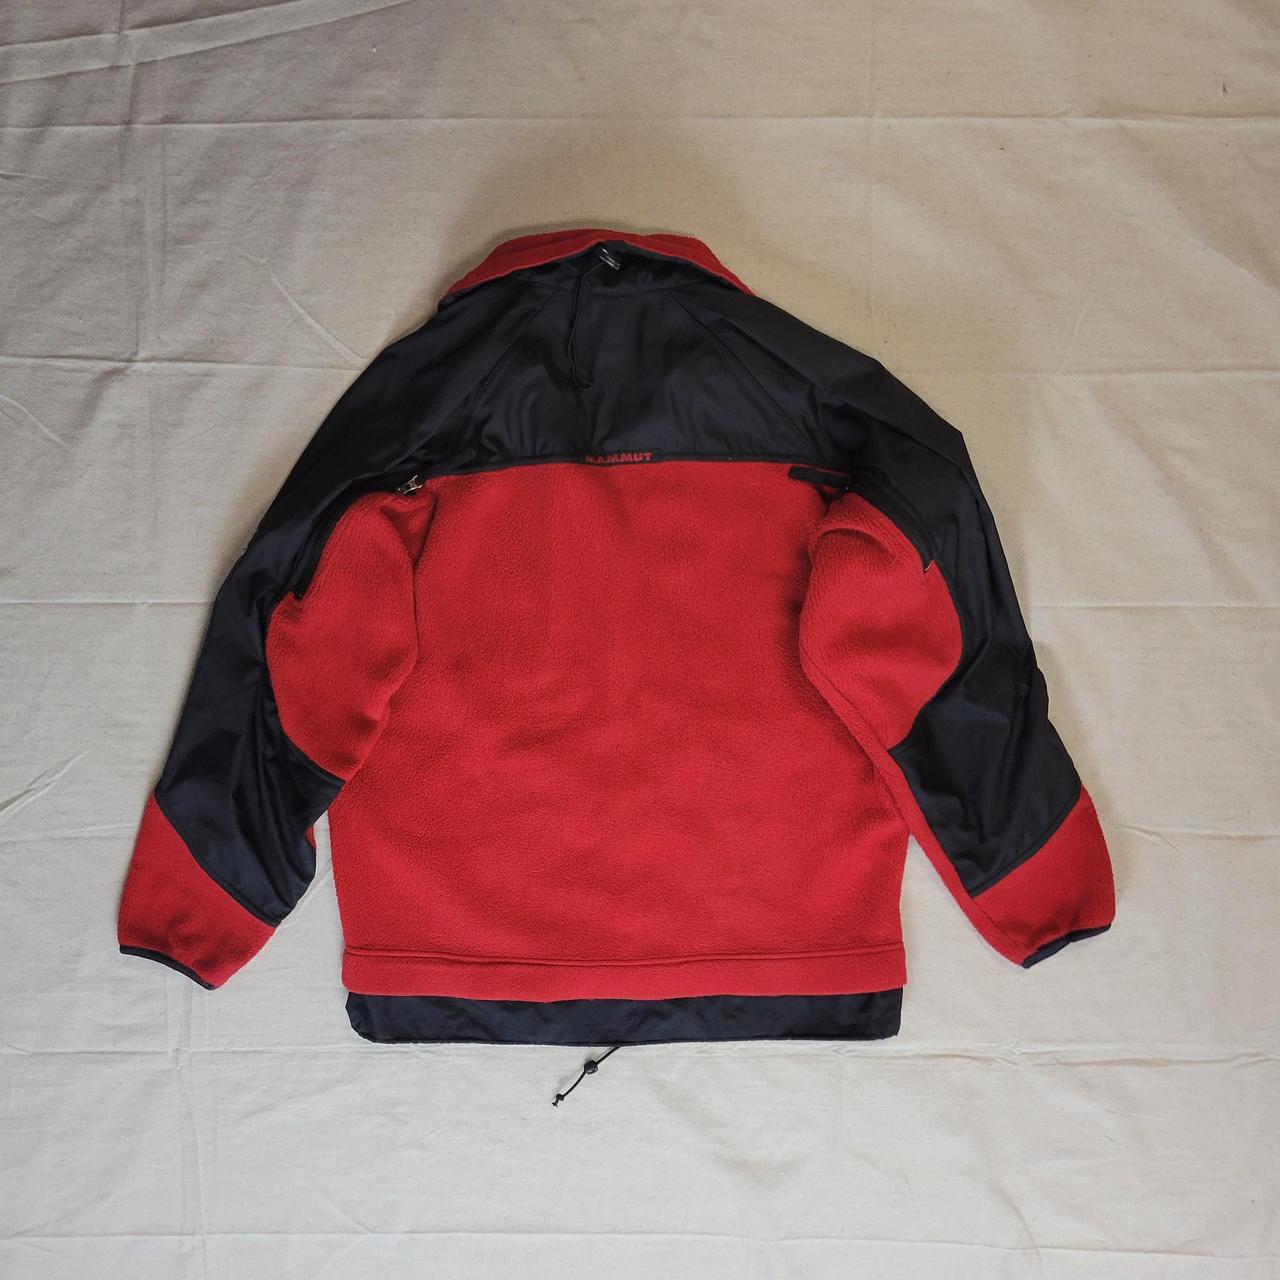 Mammut Men's Red and Black Jacket (4)